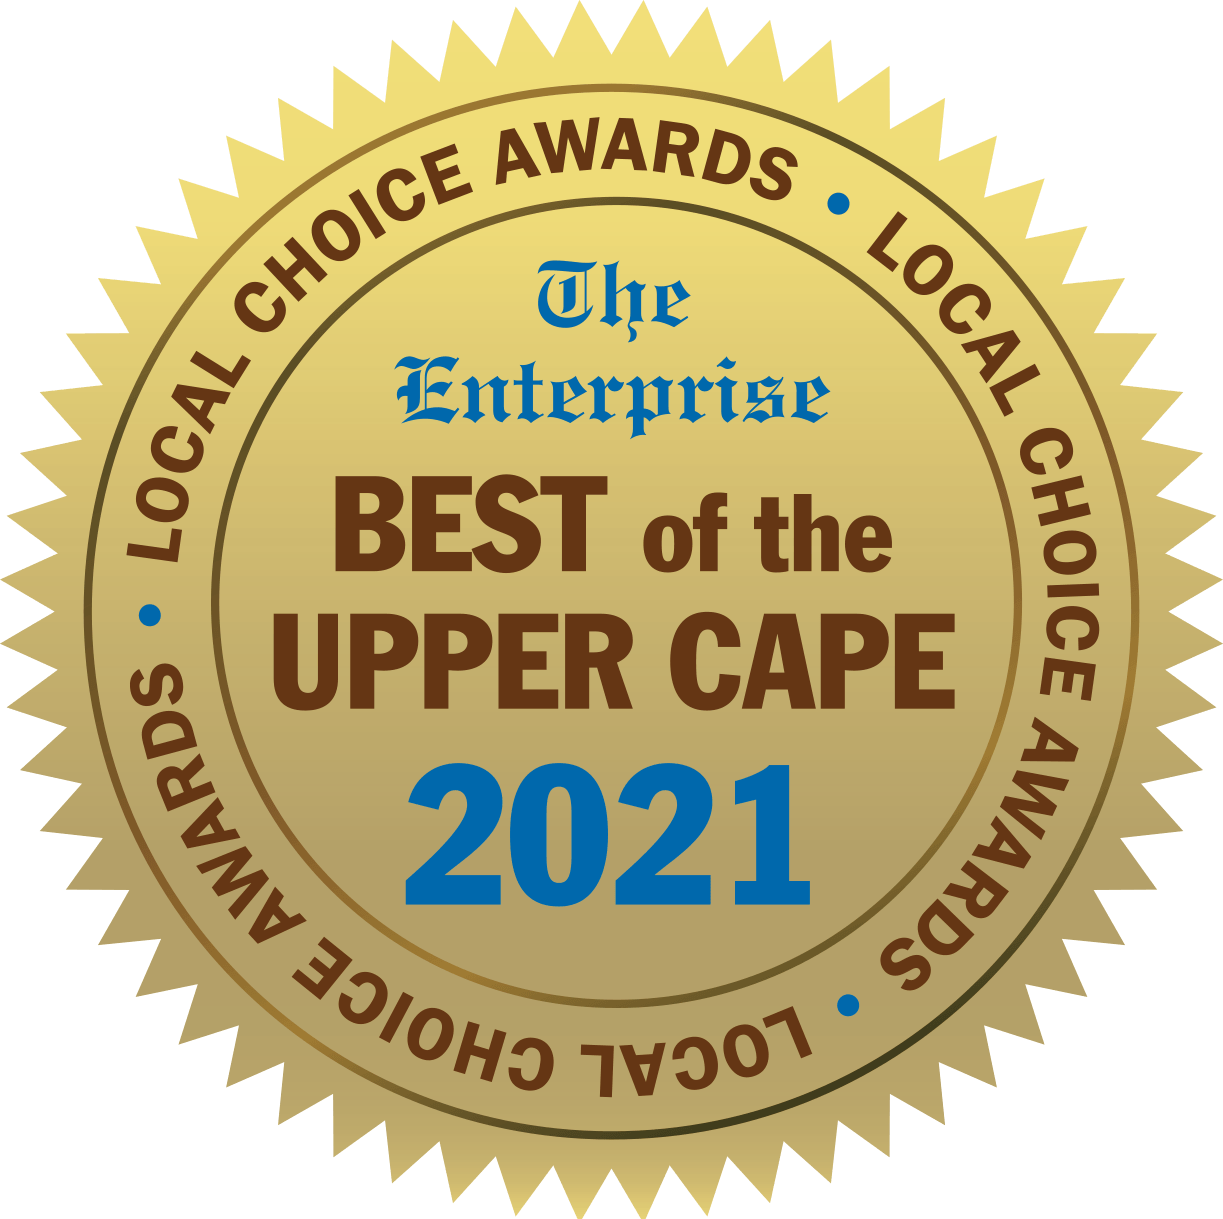 Best of the UPPER CAPE 2021